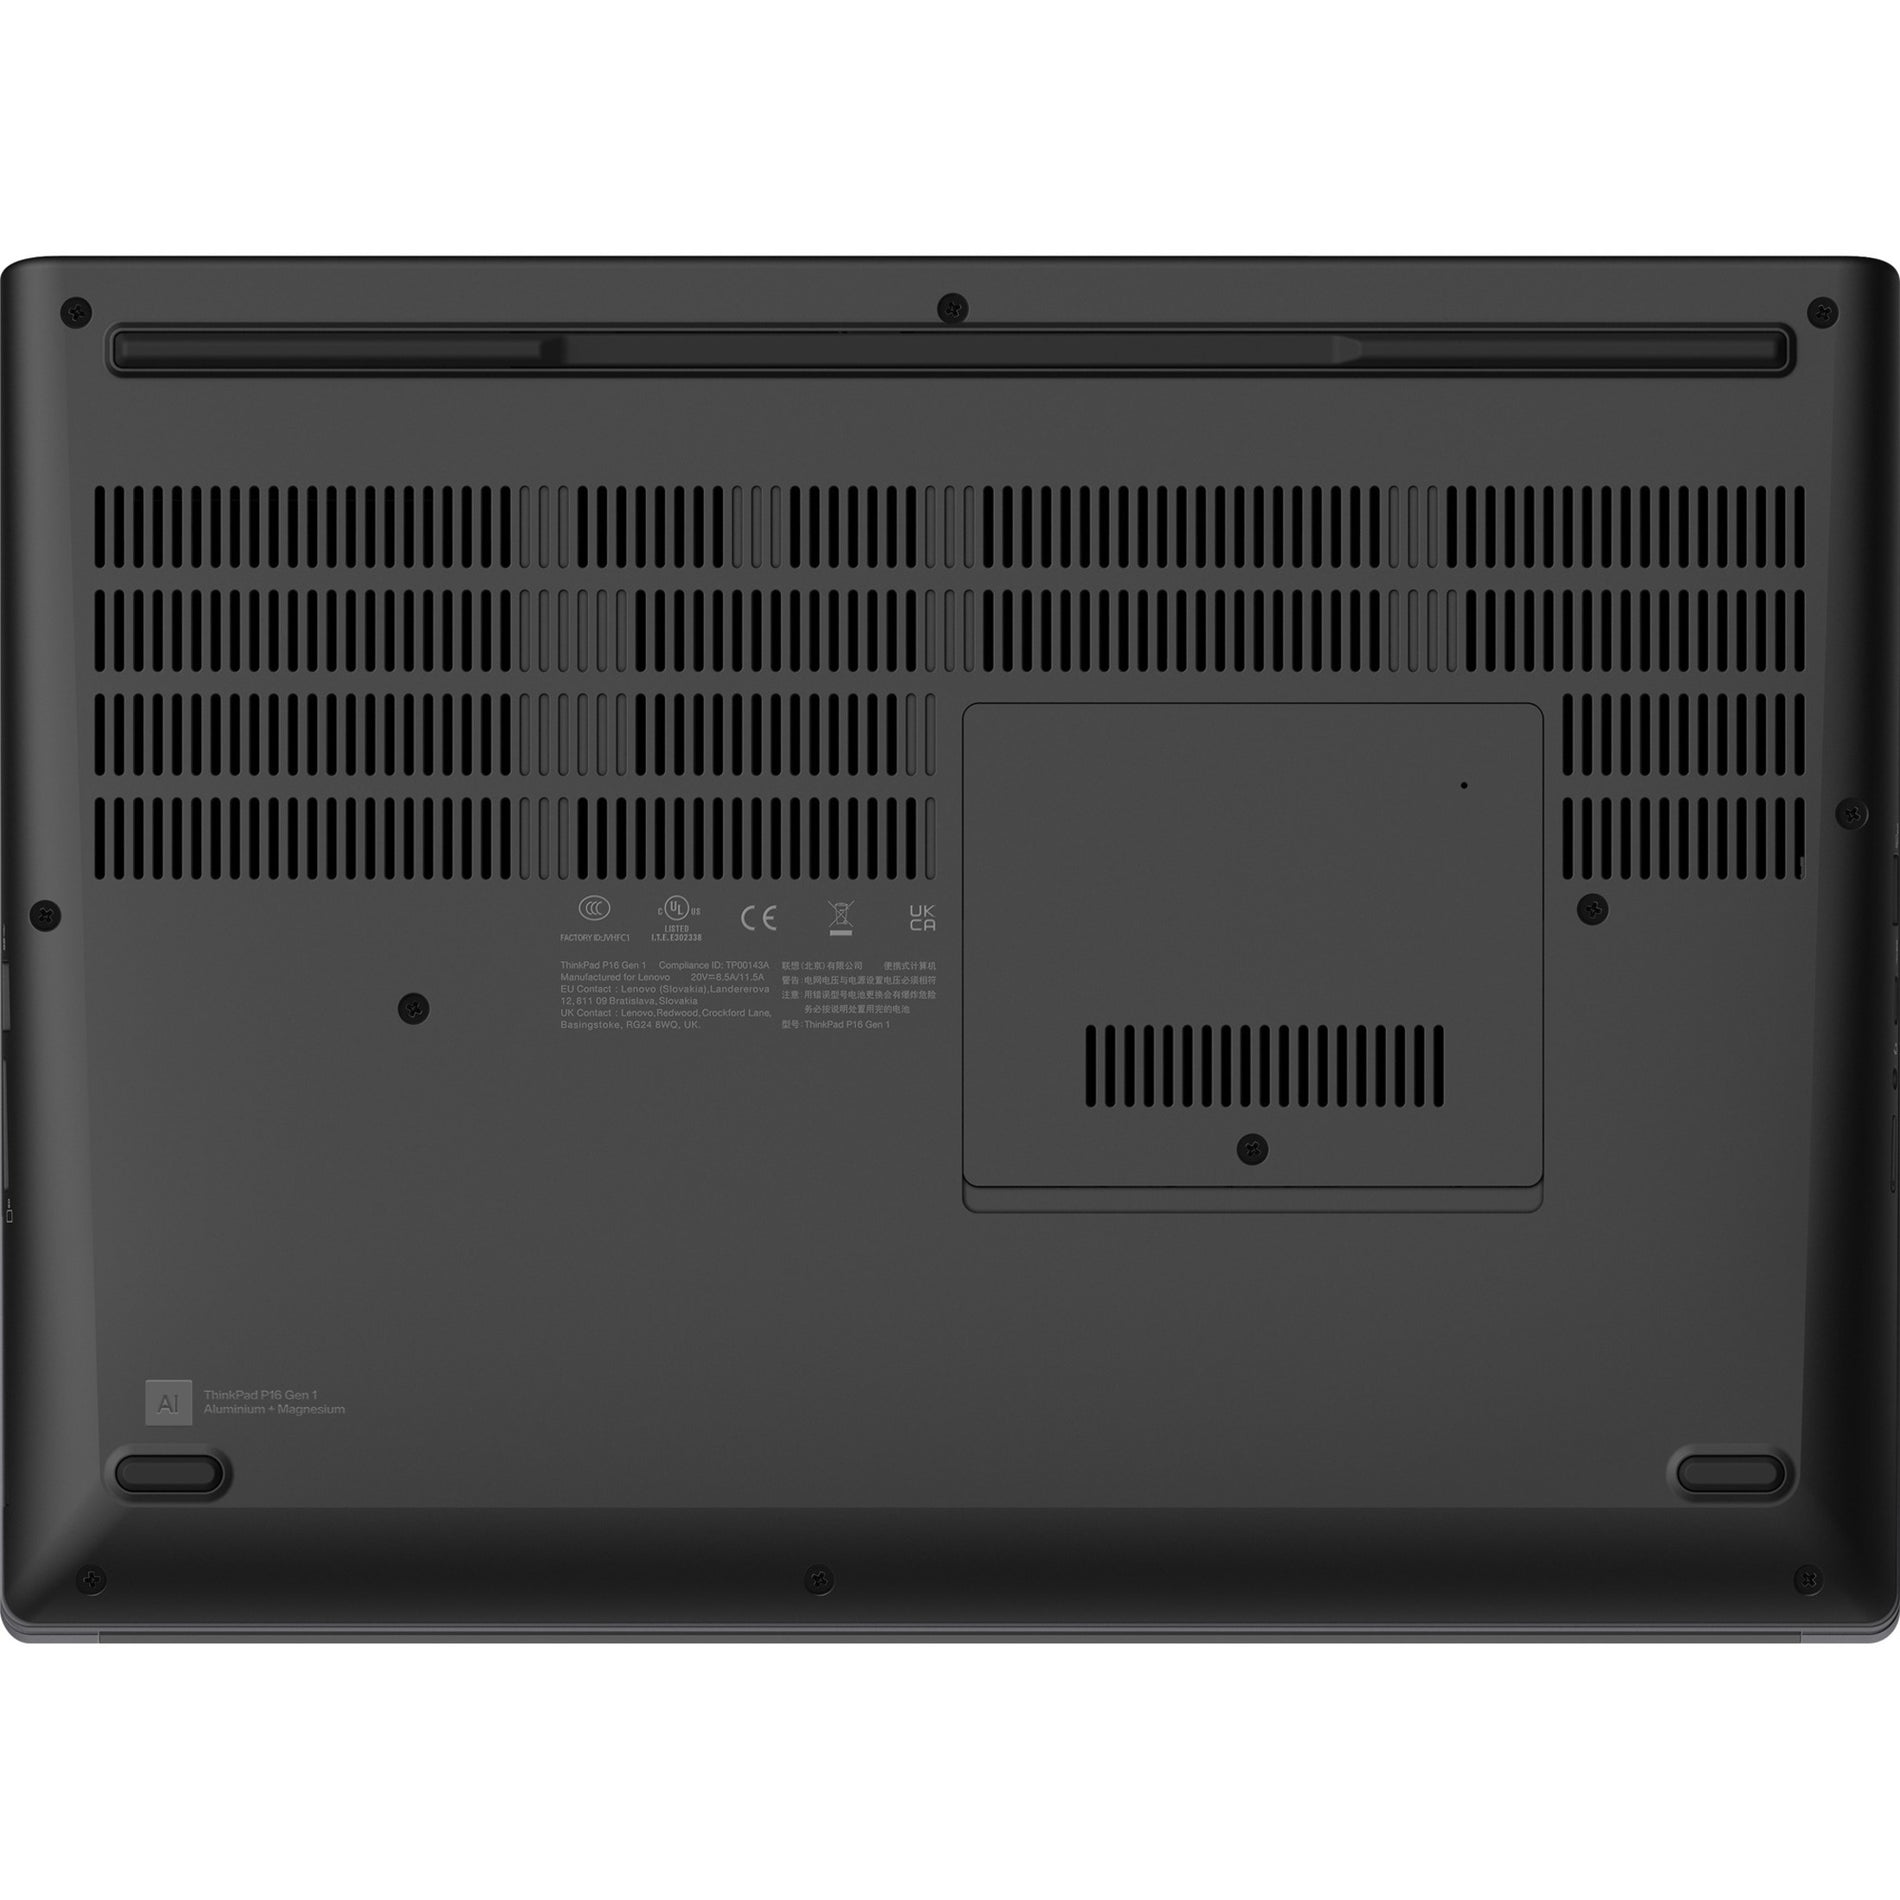 Lenovo ThinkPad P16 G1 21D6008WUS Mobile Workstation [Discontinued]